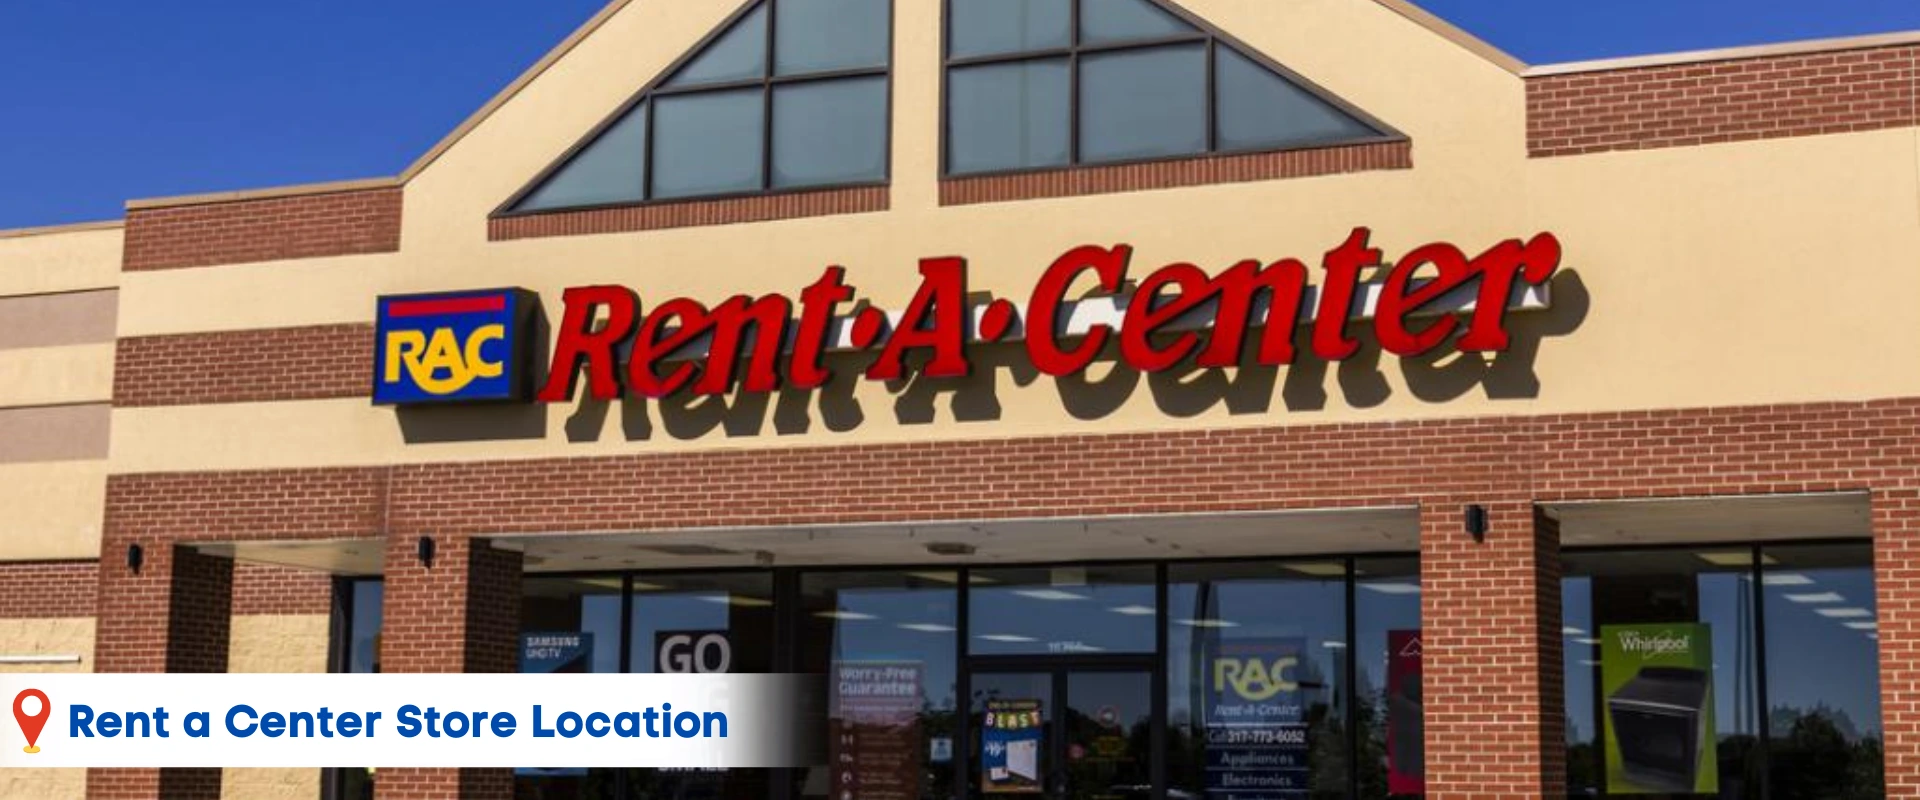 Rent a Center Near Me in Coal Township, PA.